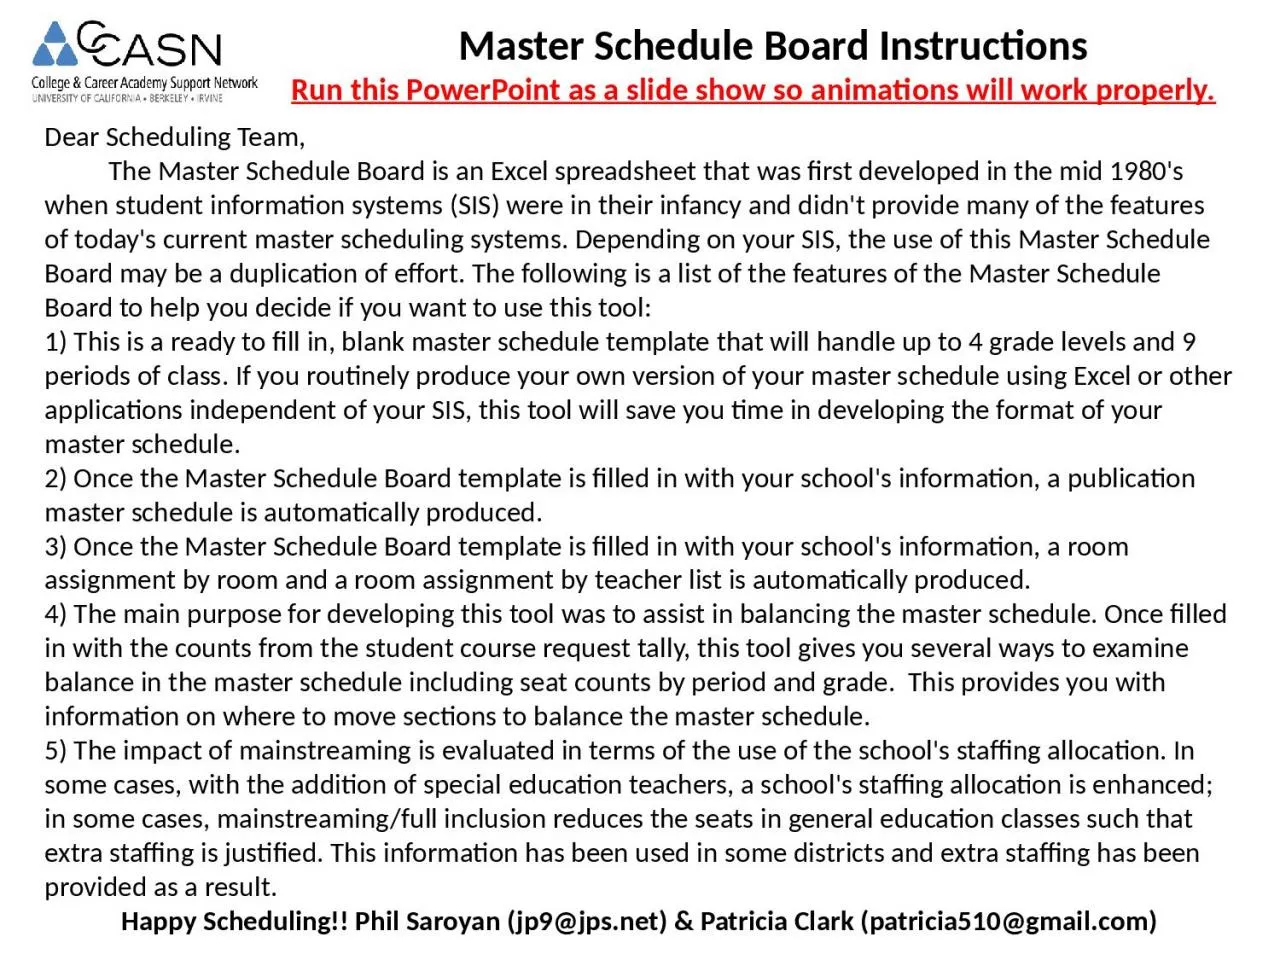 Dear Scheduling Team, 	The Master Schedule Board is an Excel spreadsheet that was first